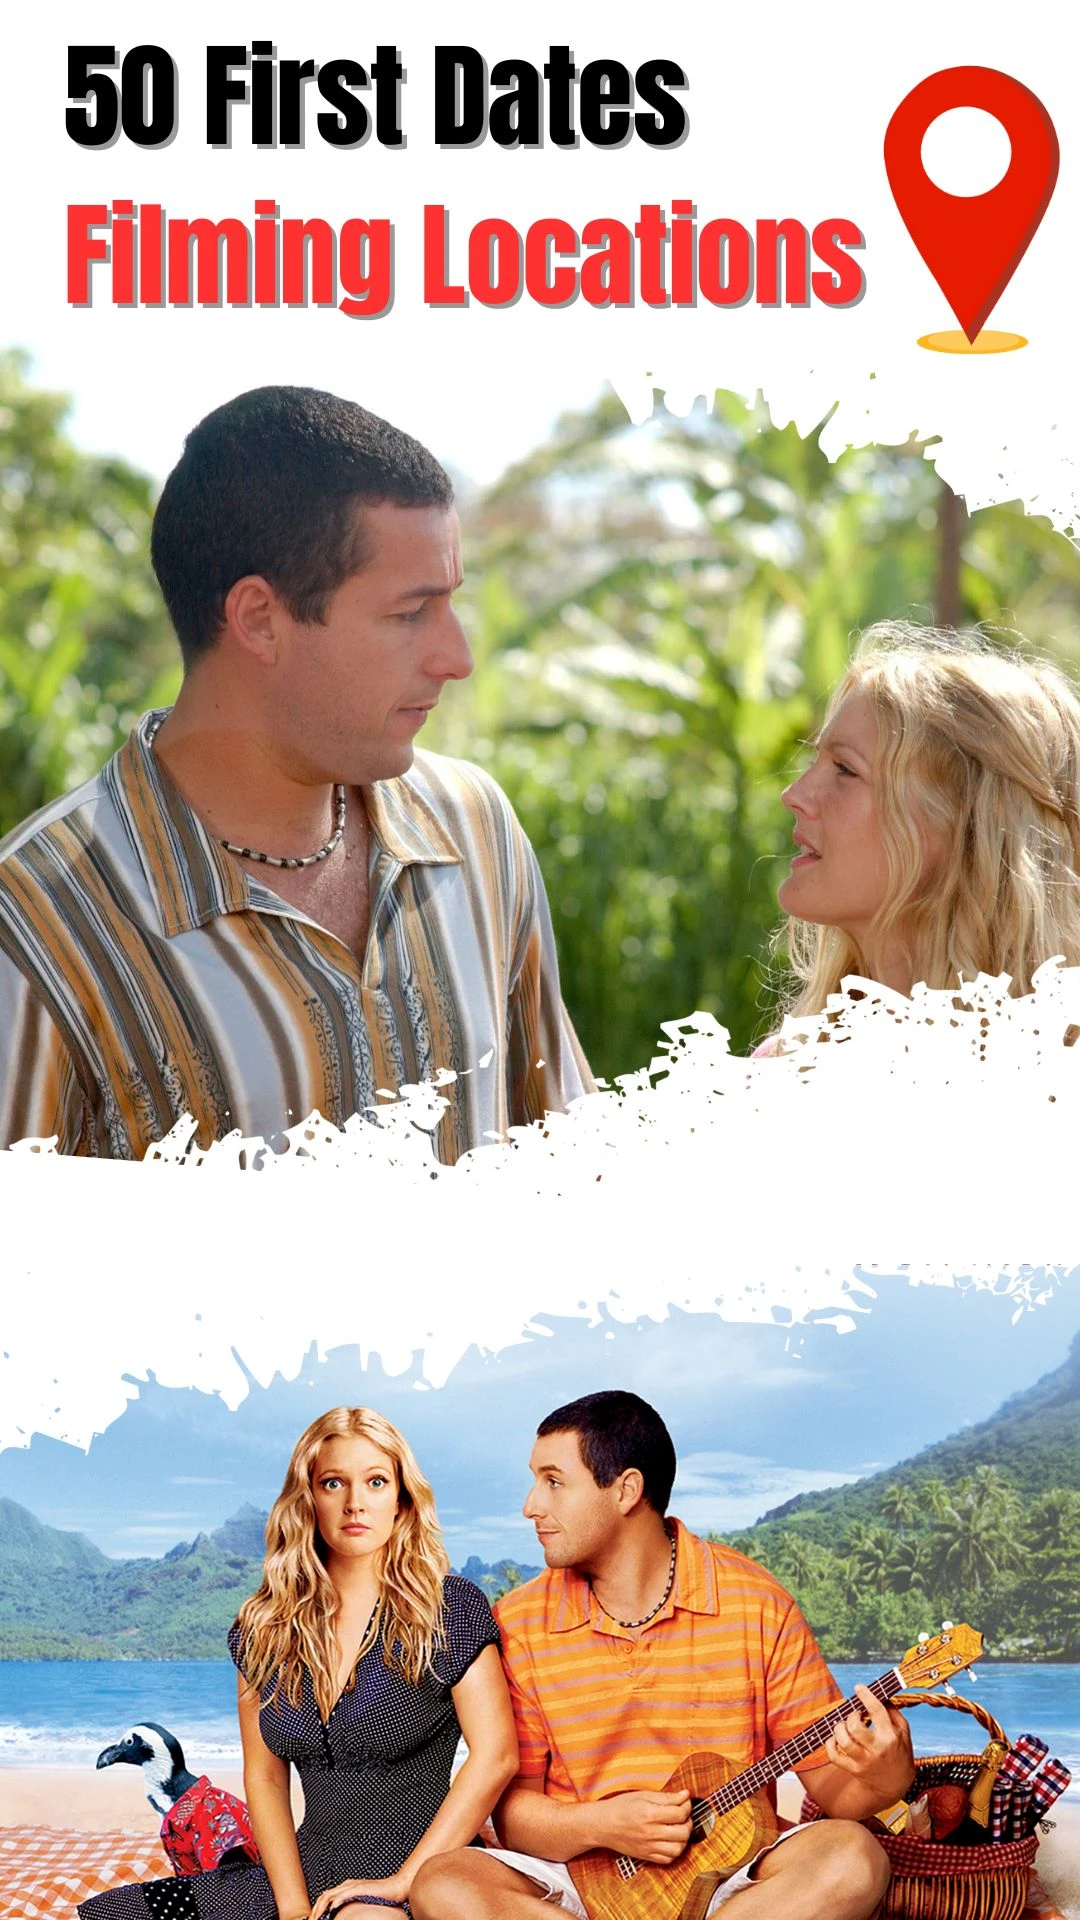 50 First Dates Filming Locations